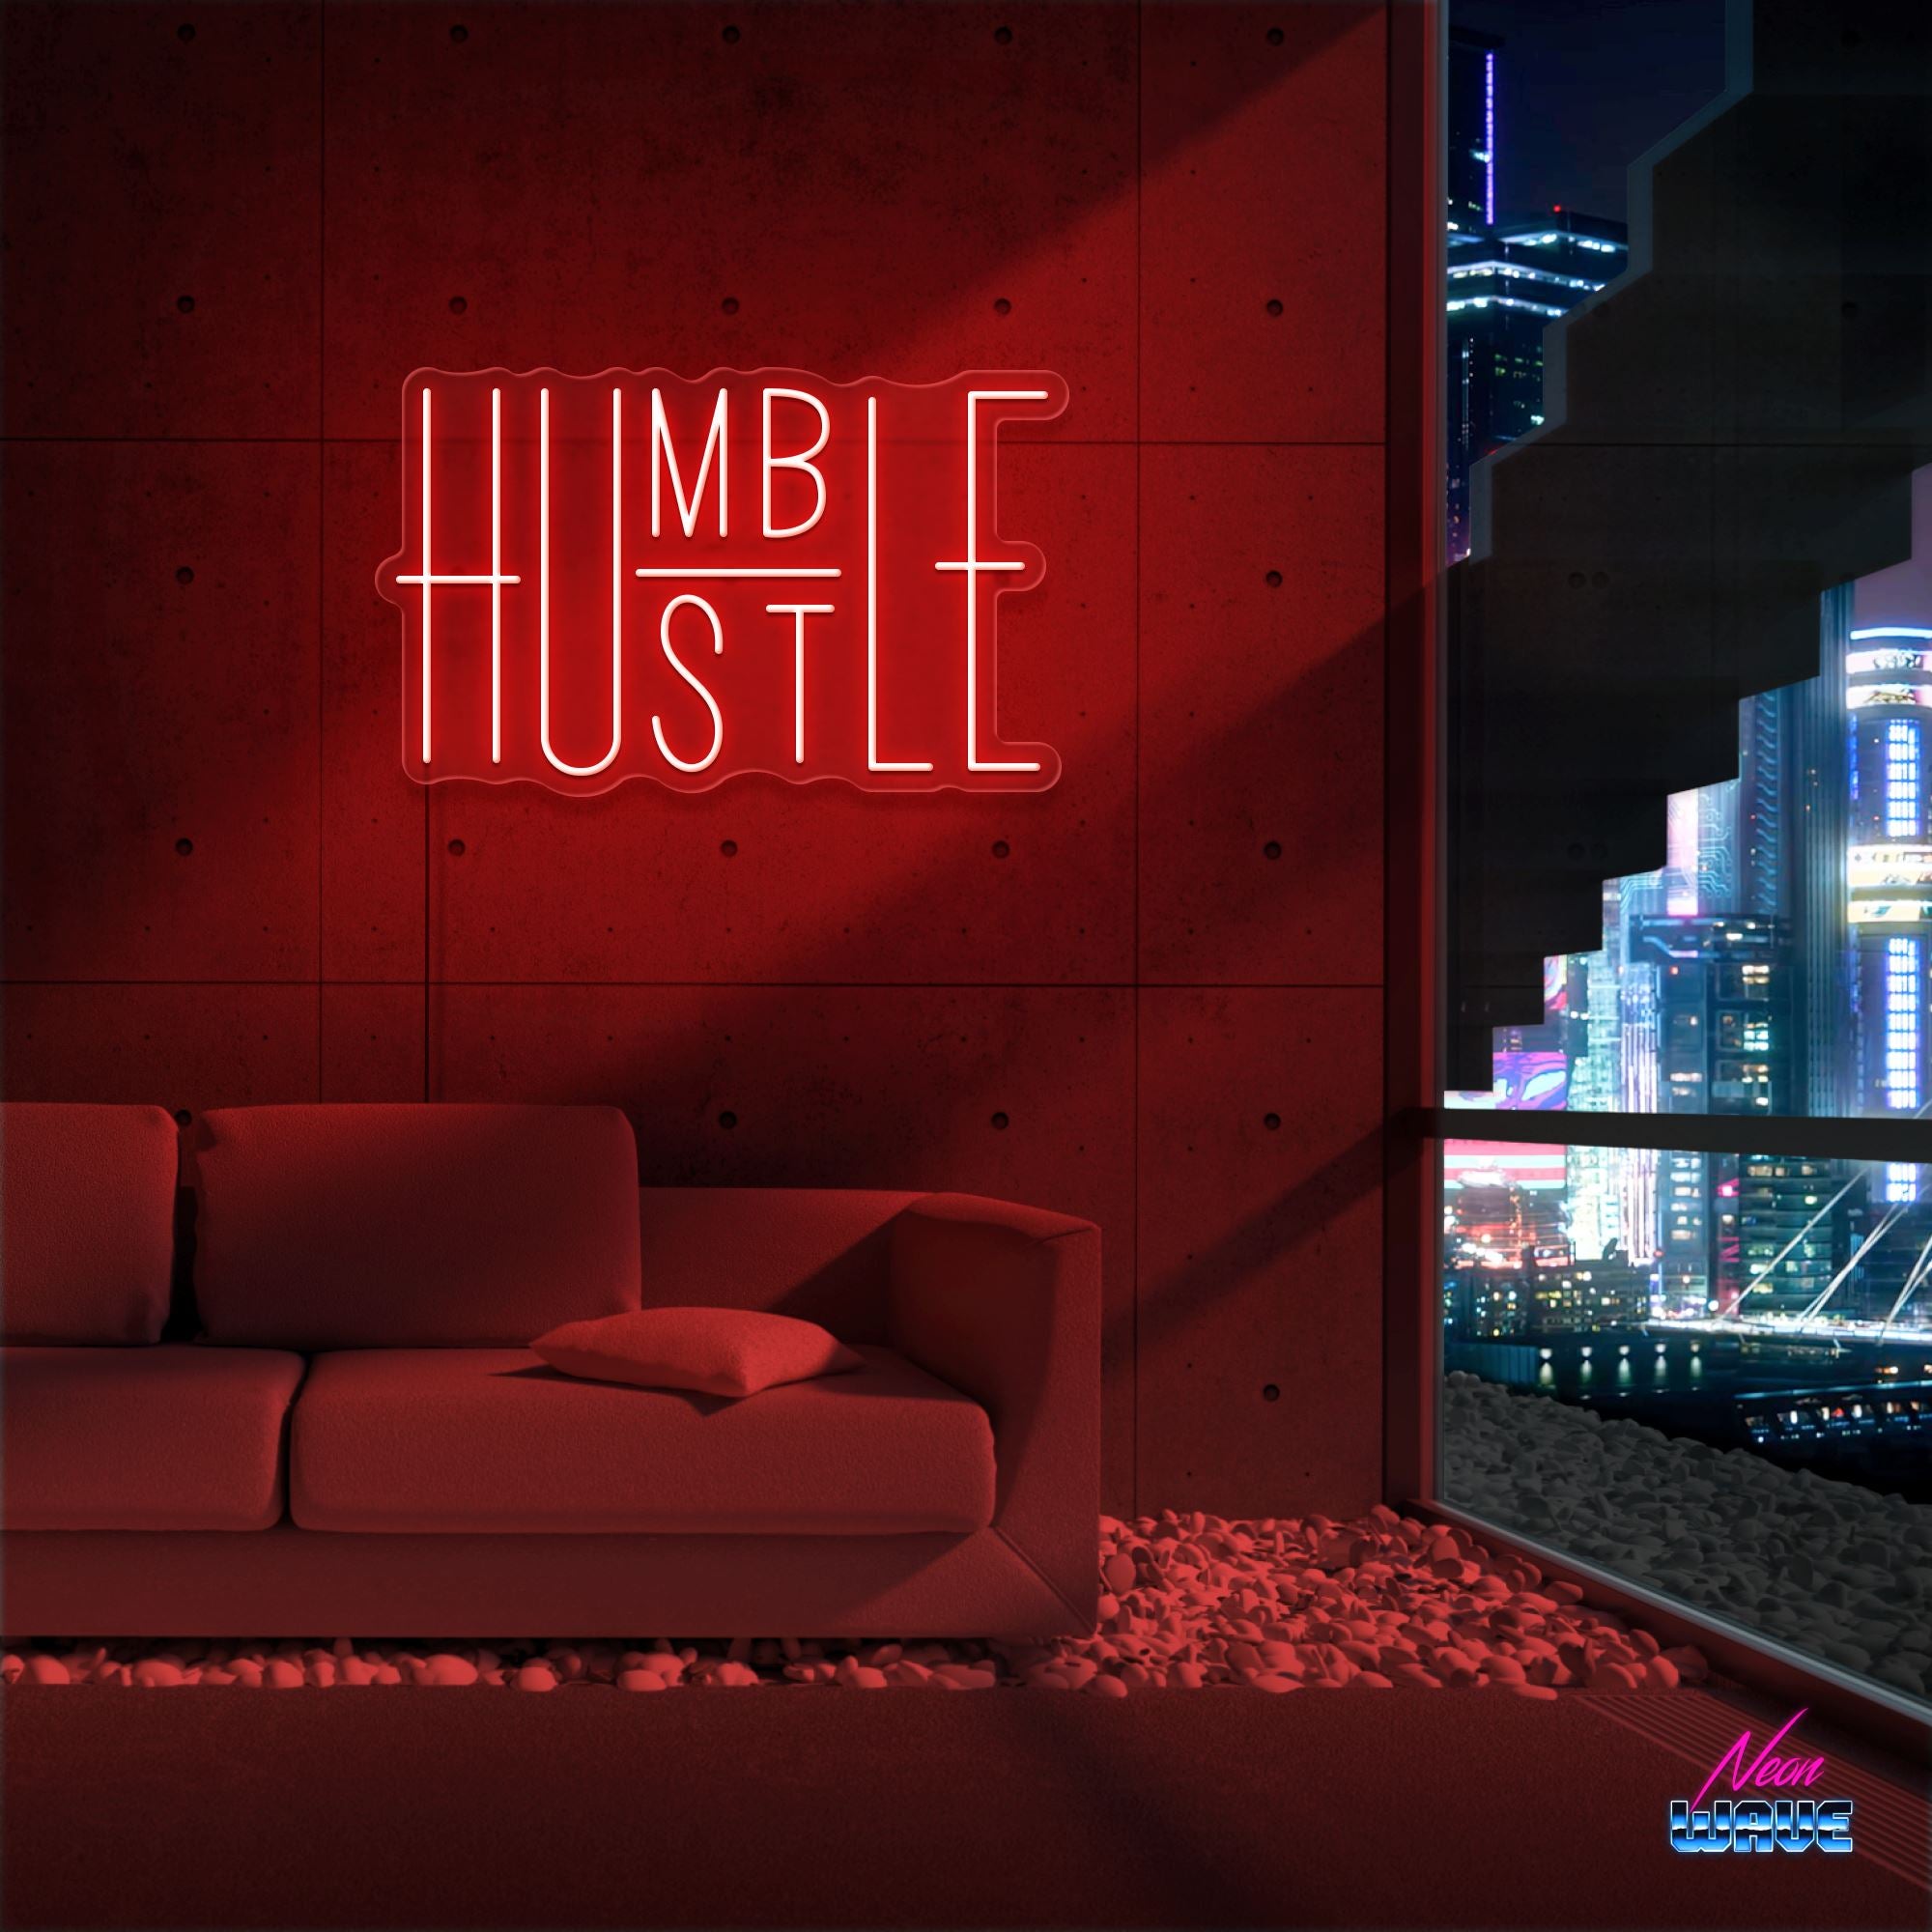 HUMBLE - HUSTLE Neon Sign Neonwave.ch 50cm Rot 